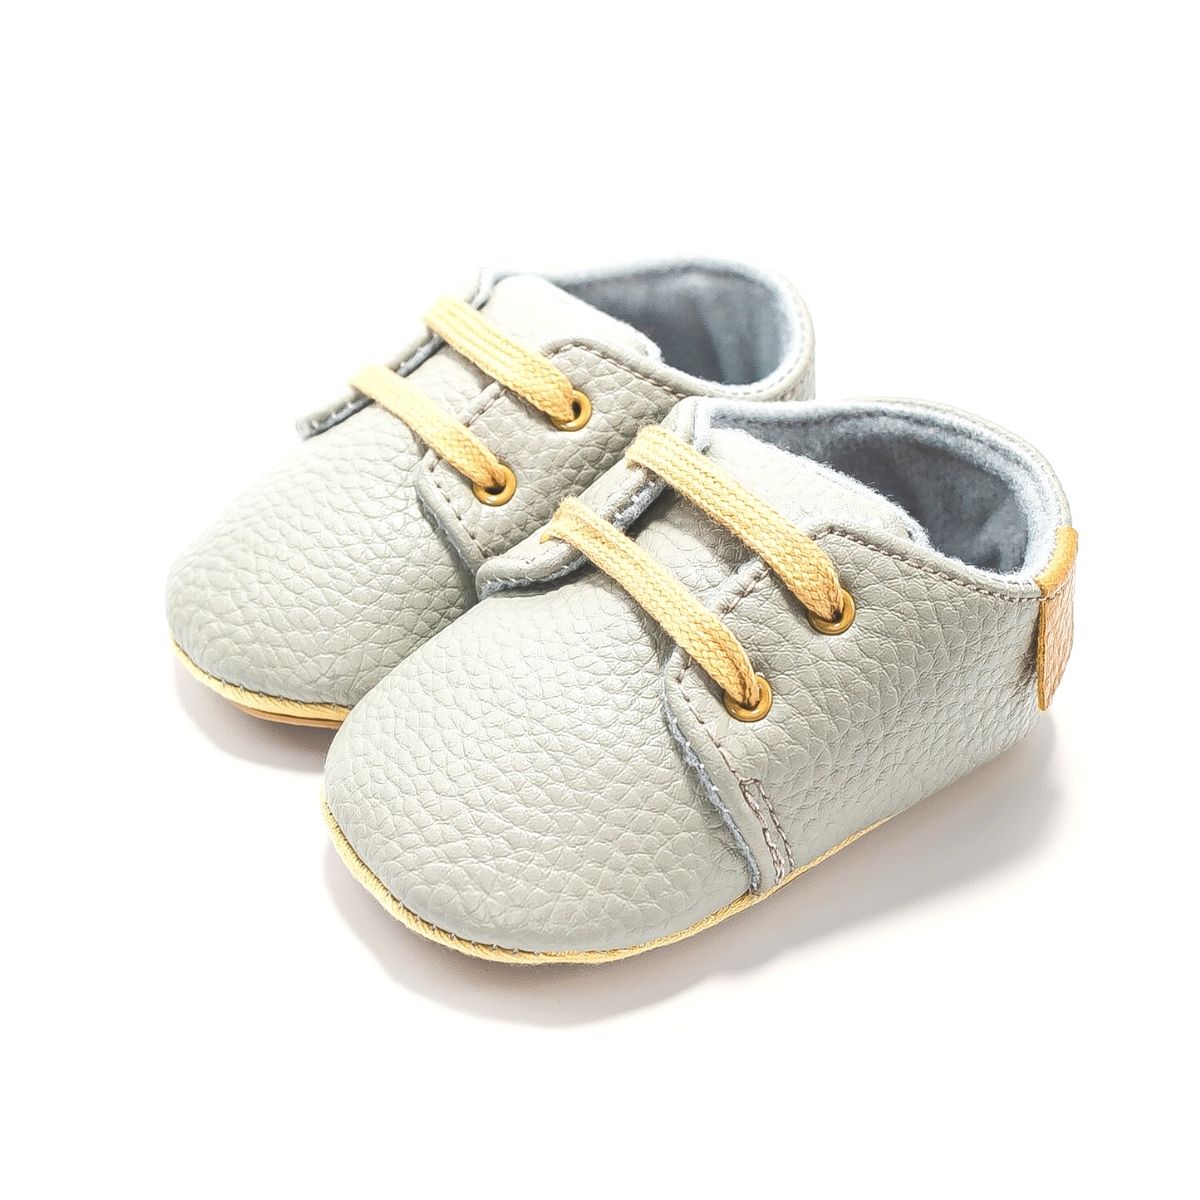 Taylor Soft Sole Shoes - Grey